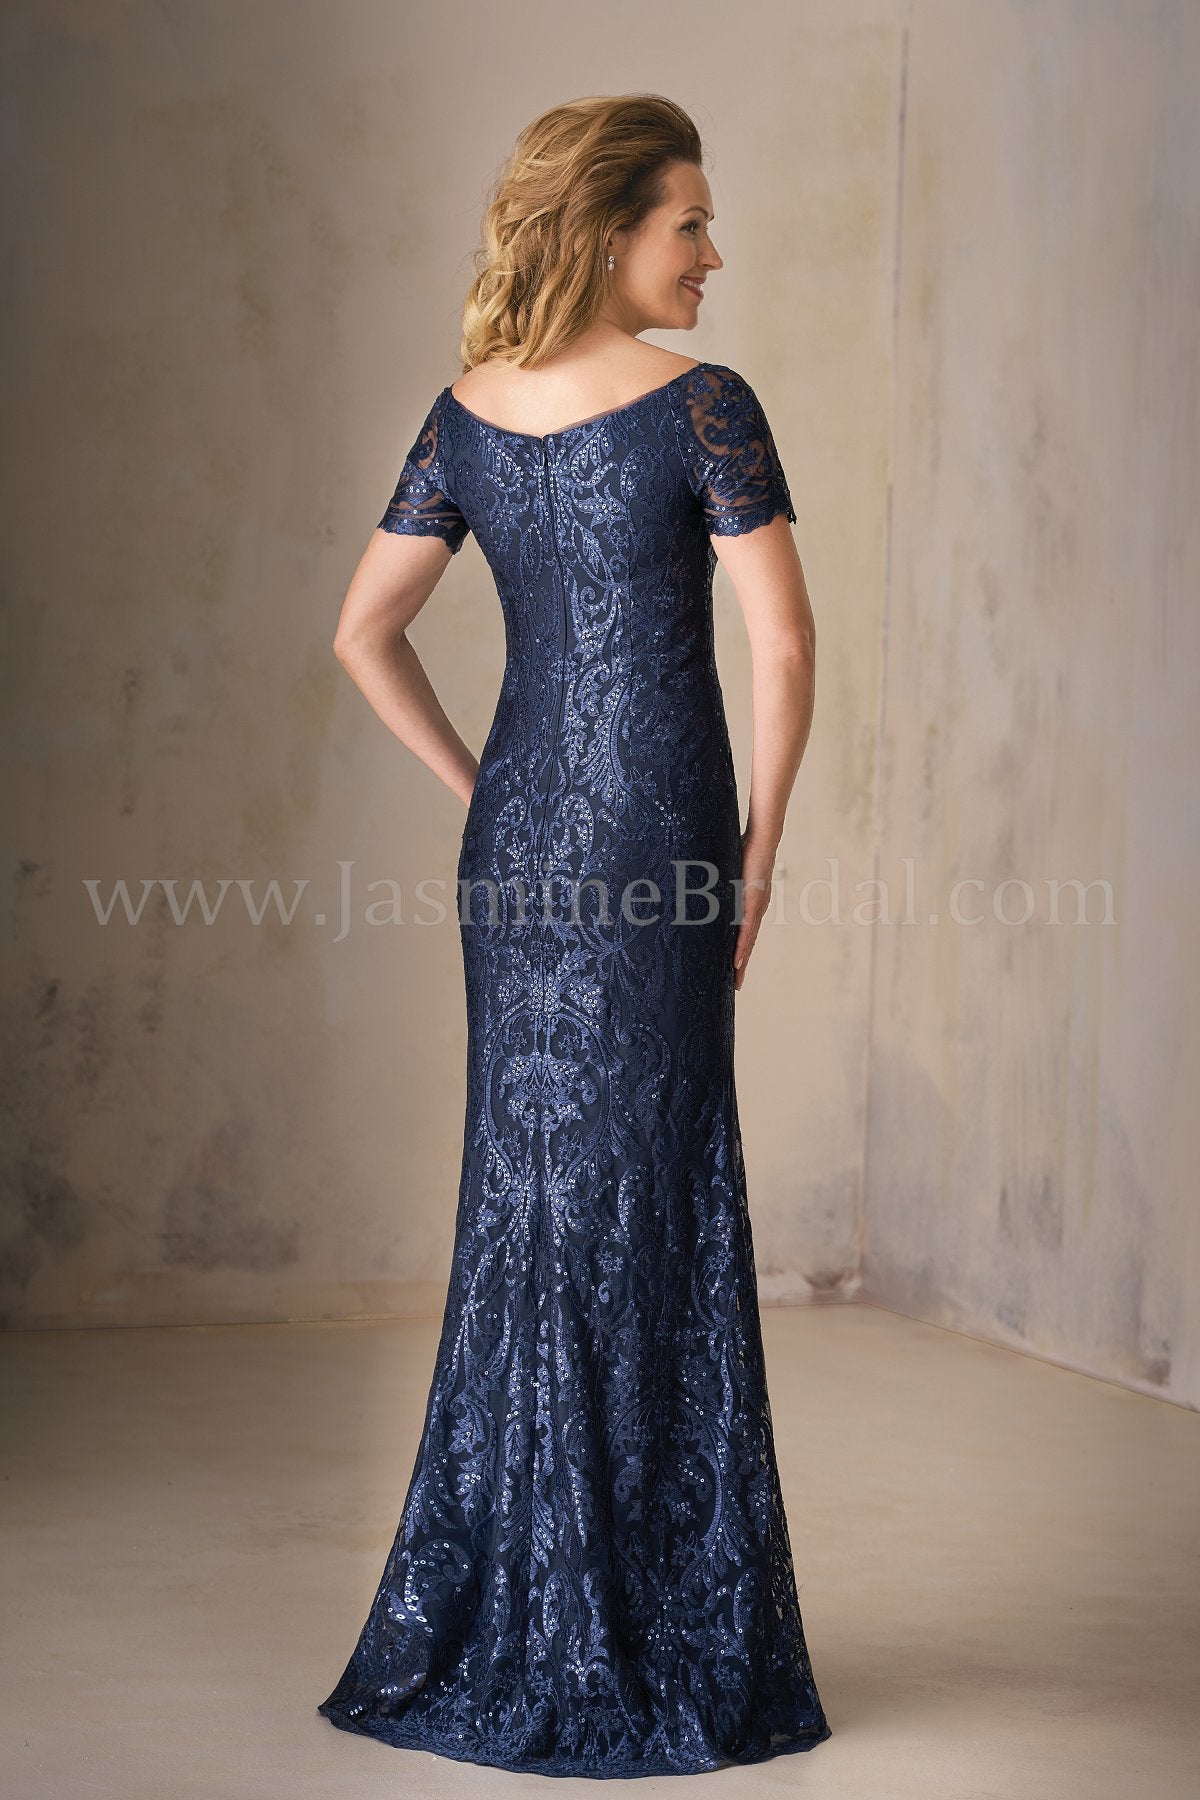 Jasmine K208009 Long Portrait Neckline Embroidery Lace MOB Dress with Short Sleeves